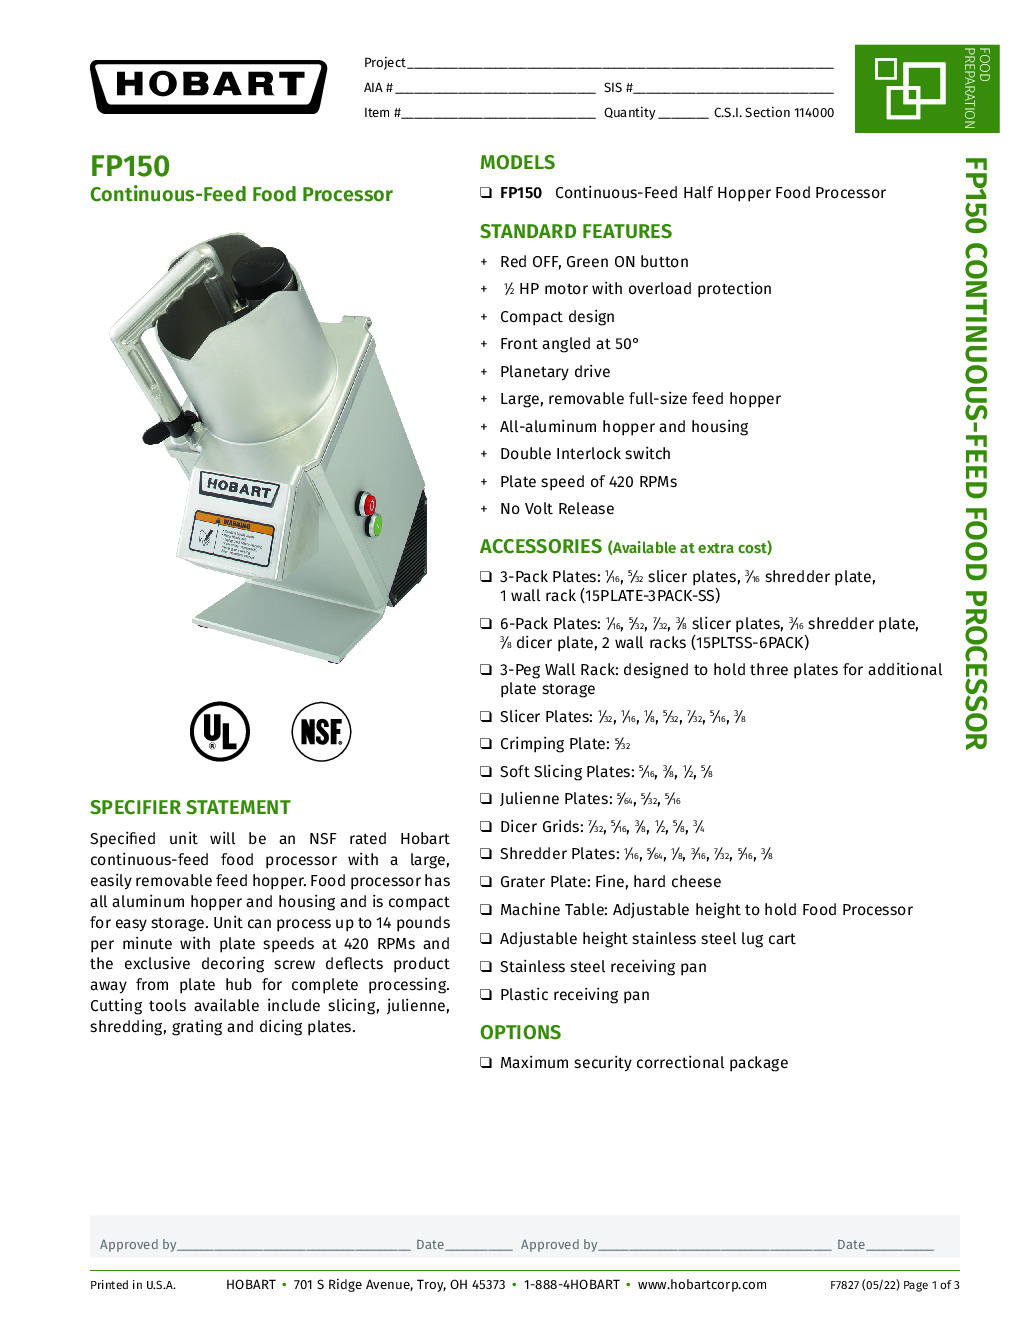 Hobart FP150-1 Benchtop Continuous Feed Food Processor, Unit Only, Full Size Hopper,14 Ib Per Minute, 1/2 hp 120v/60/1-ph